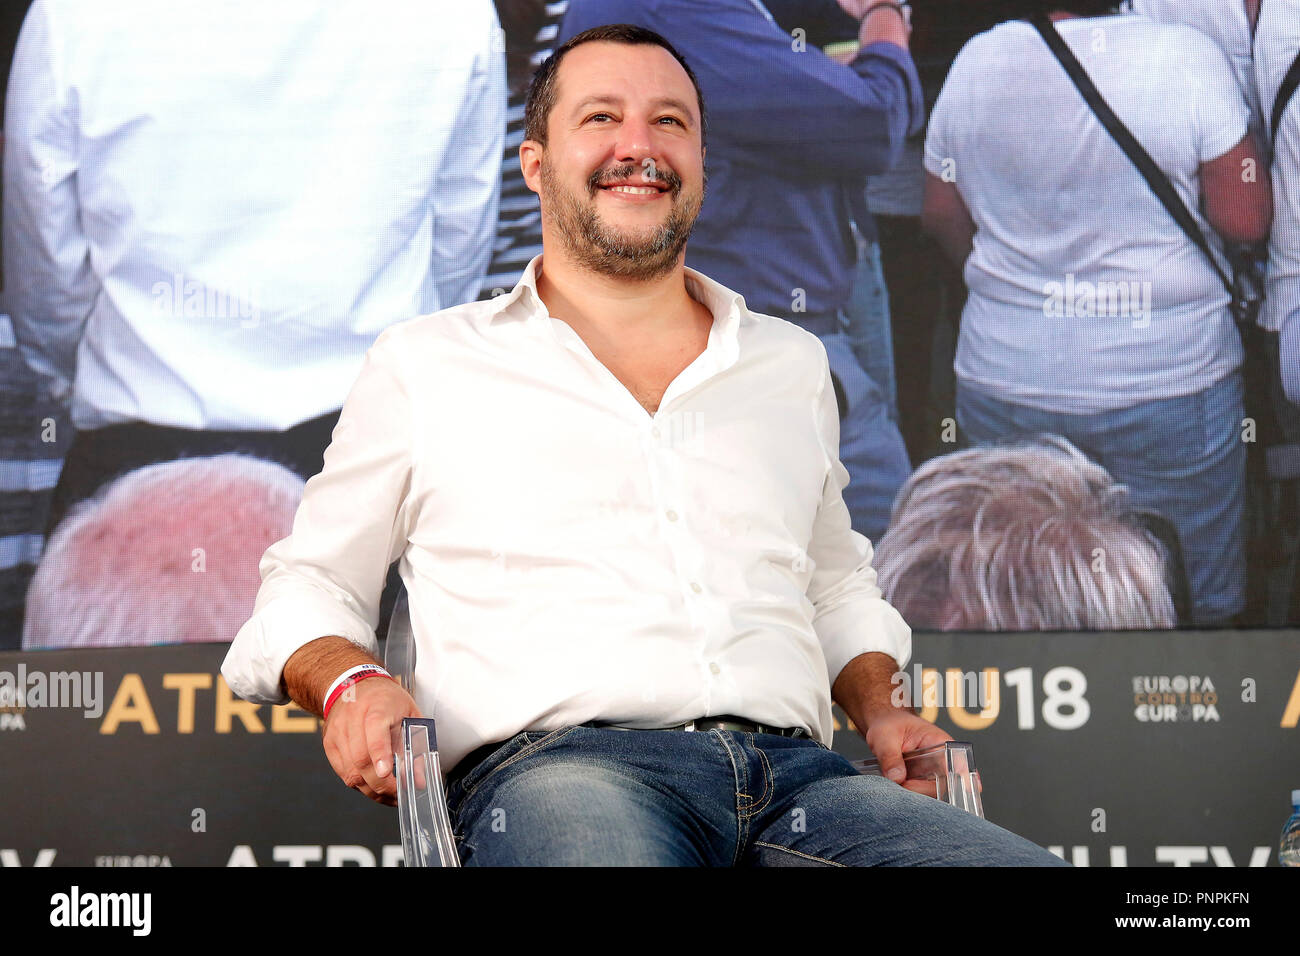 Roma, Italy. 22nd September 2018. Matteo Salvini Roma 22/09/2018. Atreju  2018. Ospite il ministro dell'Interno. Rome September 22nd 2018. The  Italian minister of Internal Affairs appears as a guest at Atreju 2018.